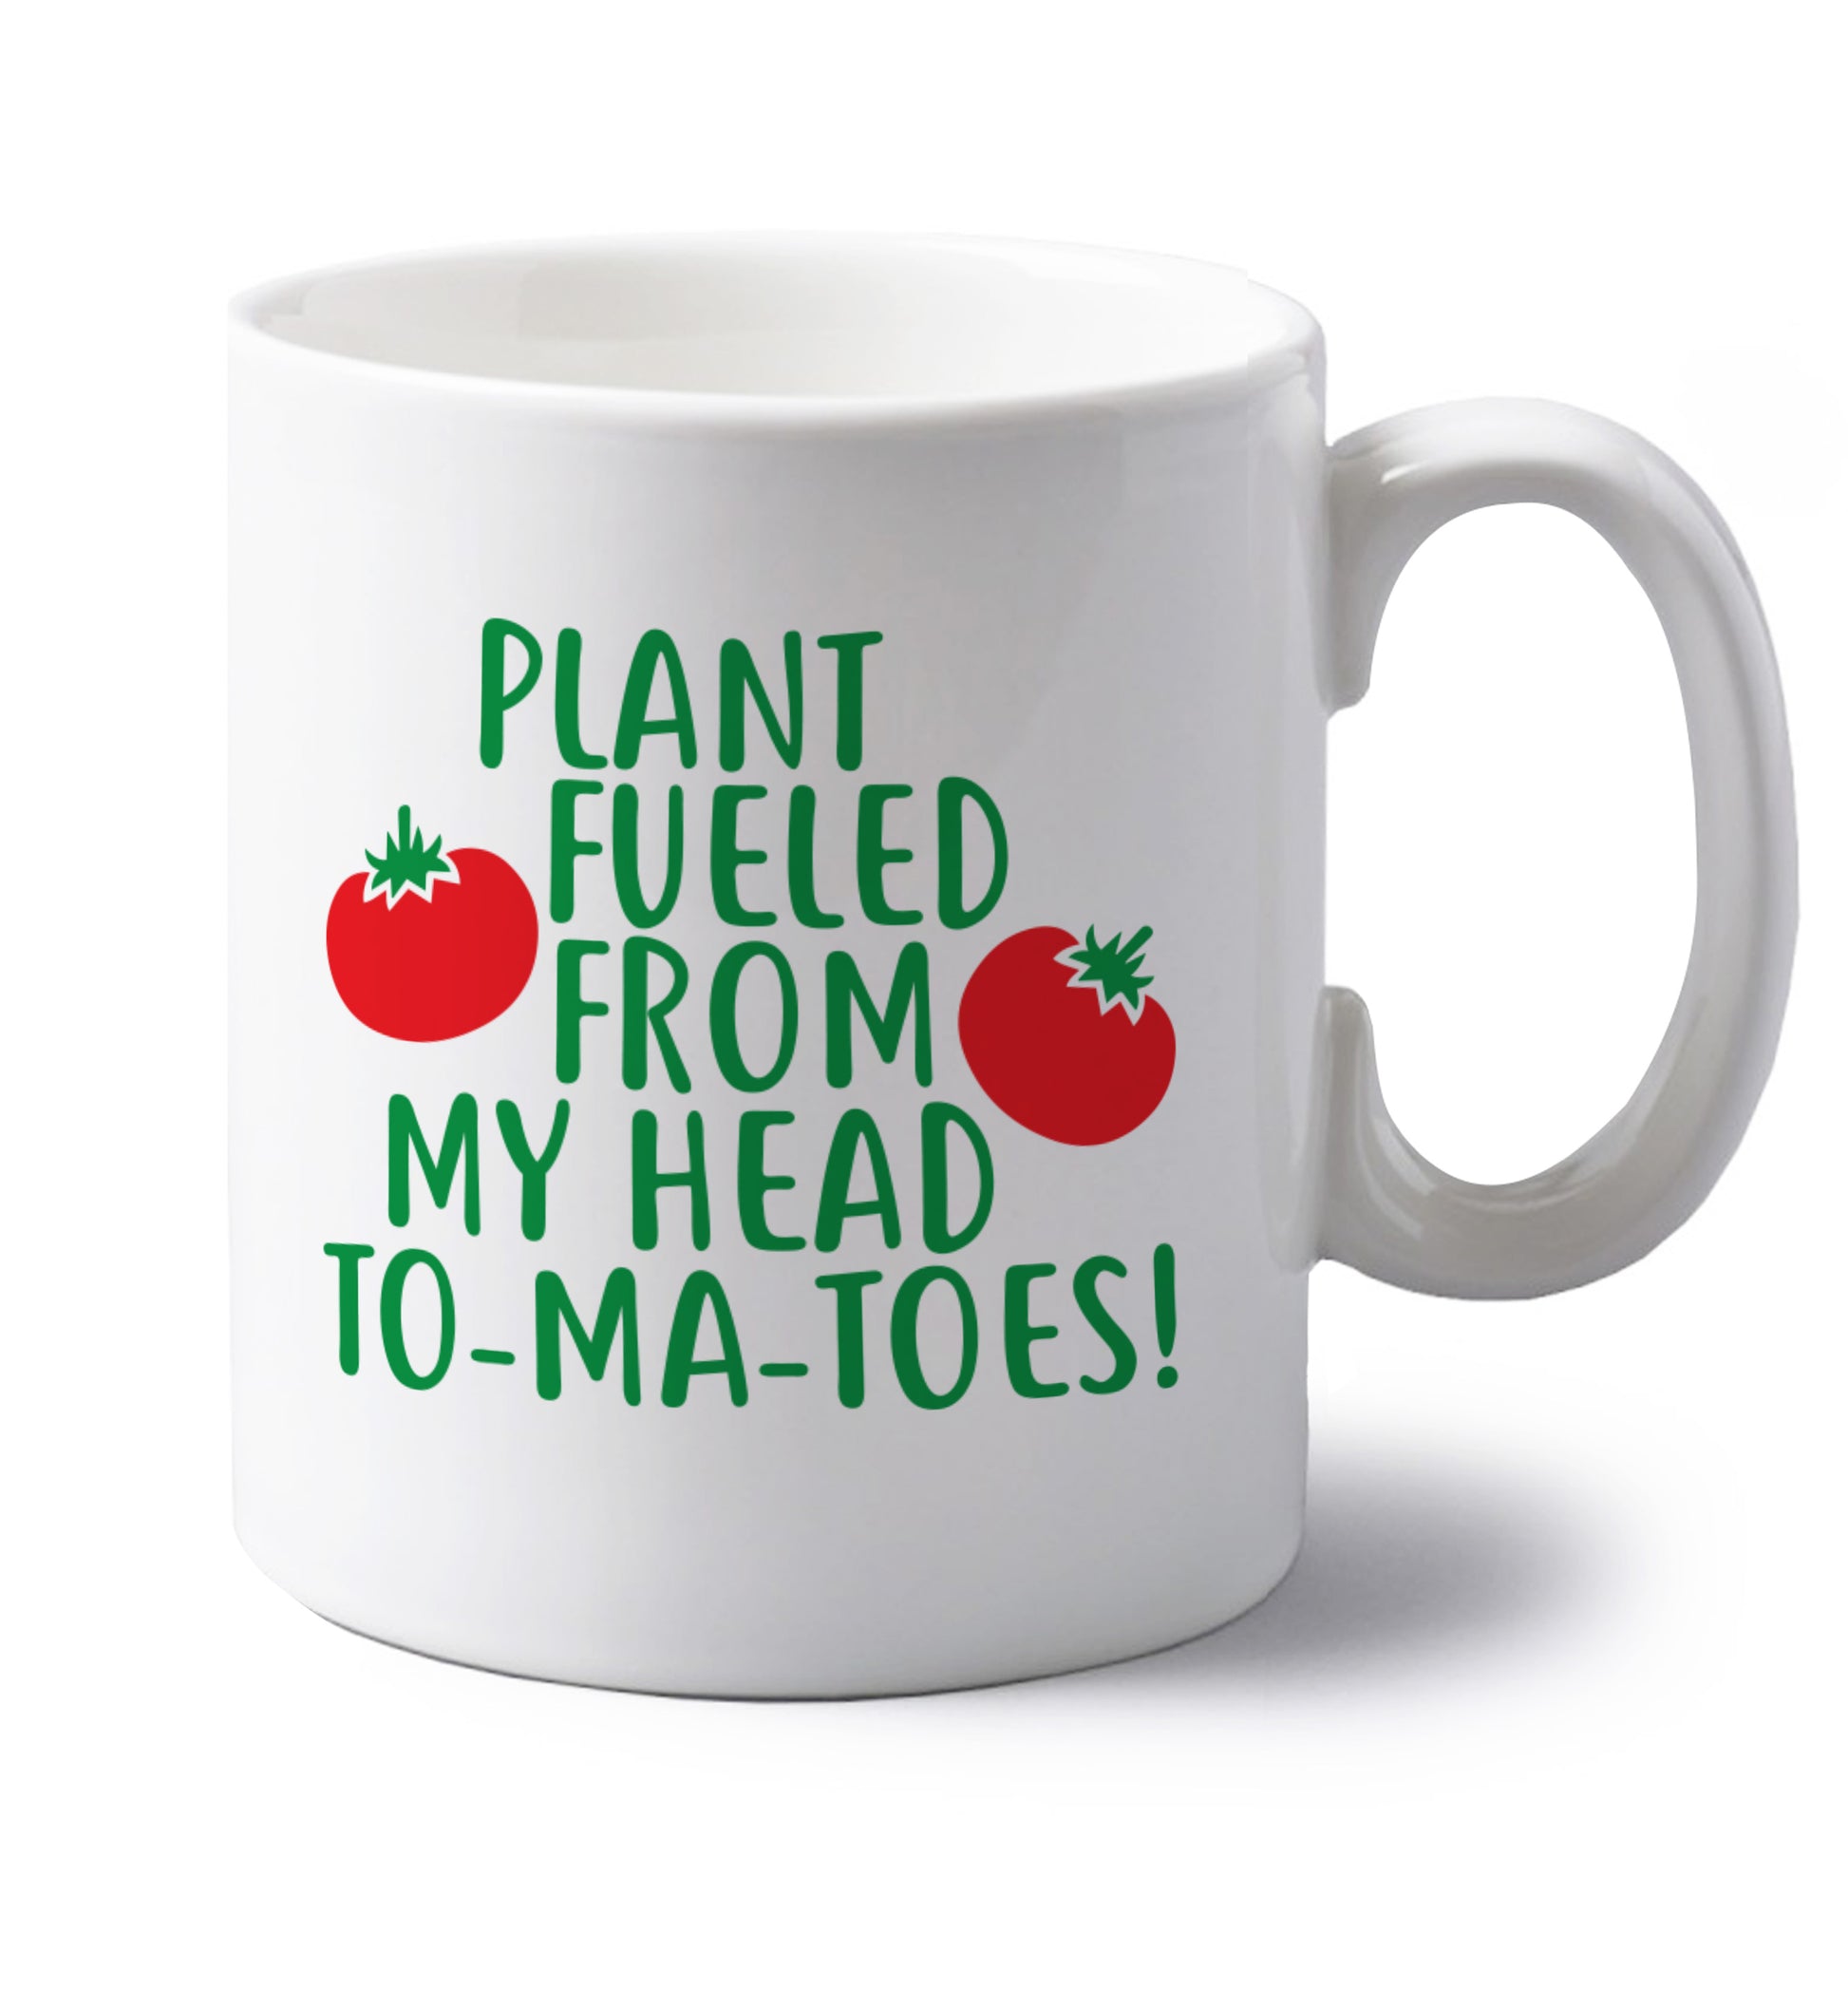 Plant fueled from my head to-ma-toes left handed white ceramic mug 